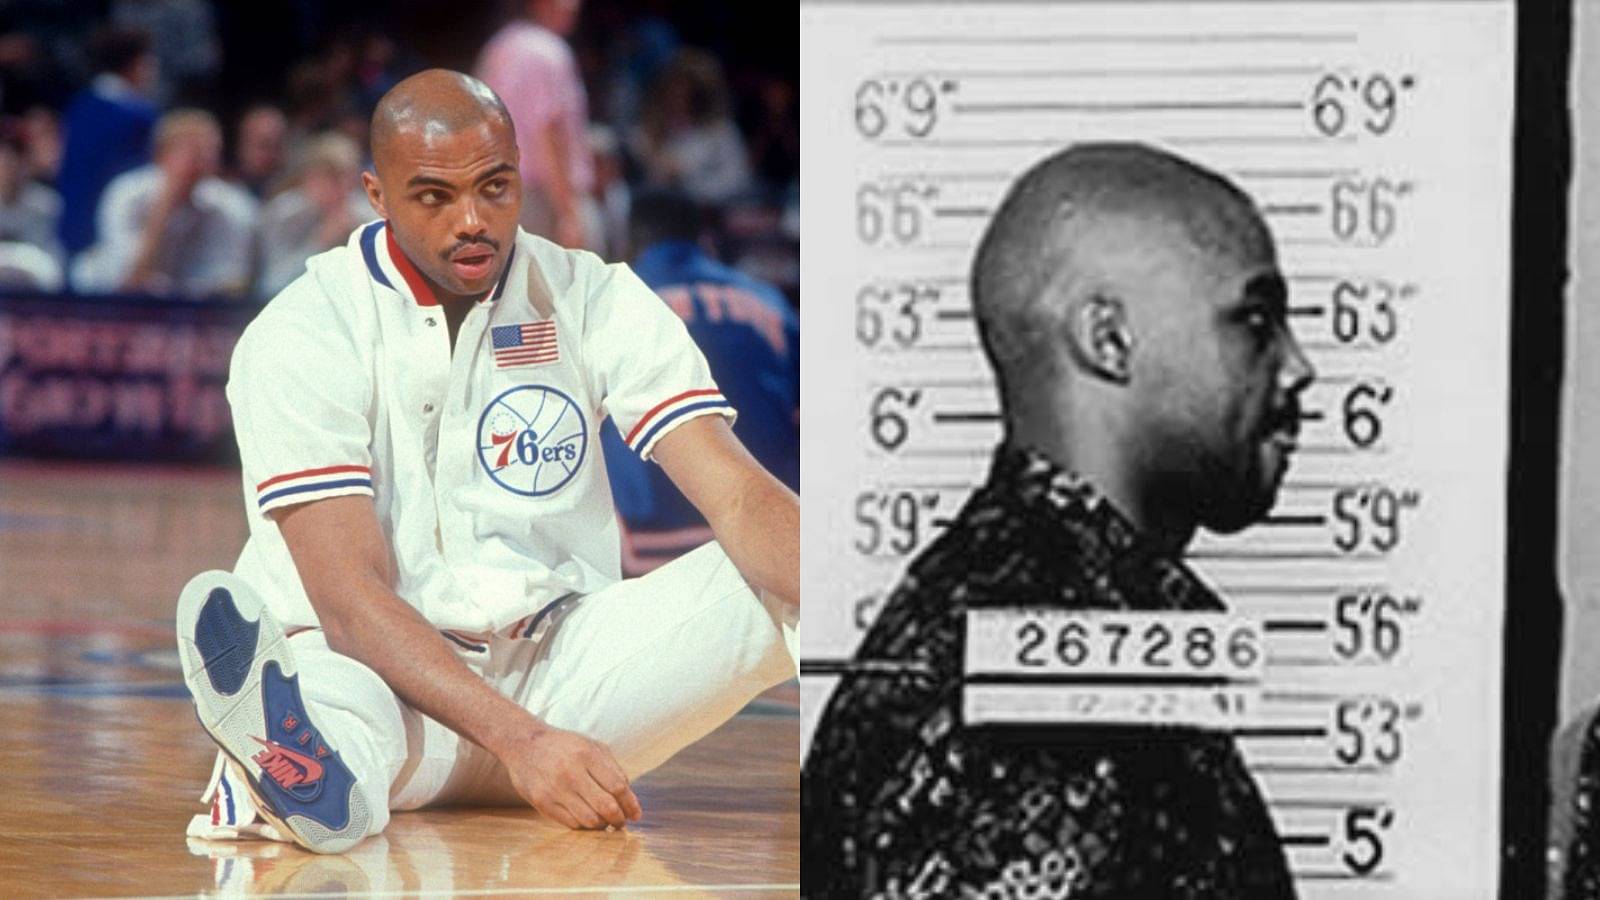 Charles Barkley got arrested at least 6 times for fighting fans but thanks to his $50 million net worth, he settled with all the victims as he doesn't trust the American judiciary